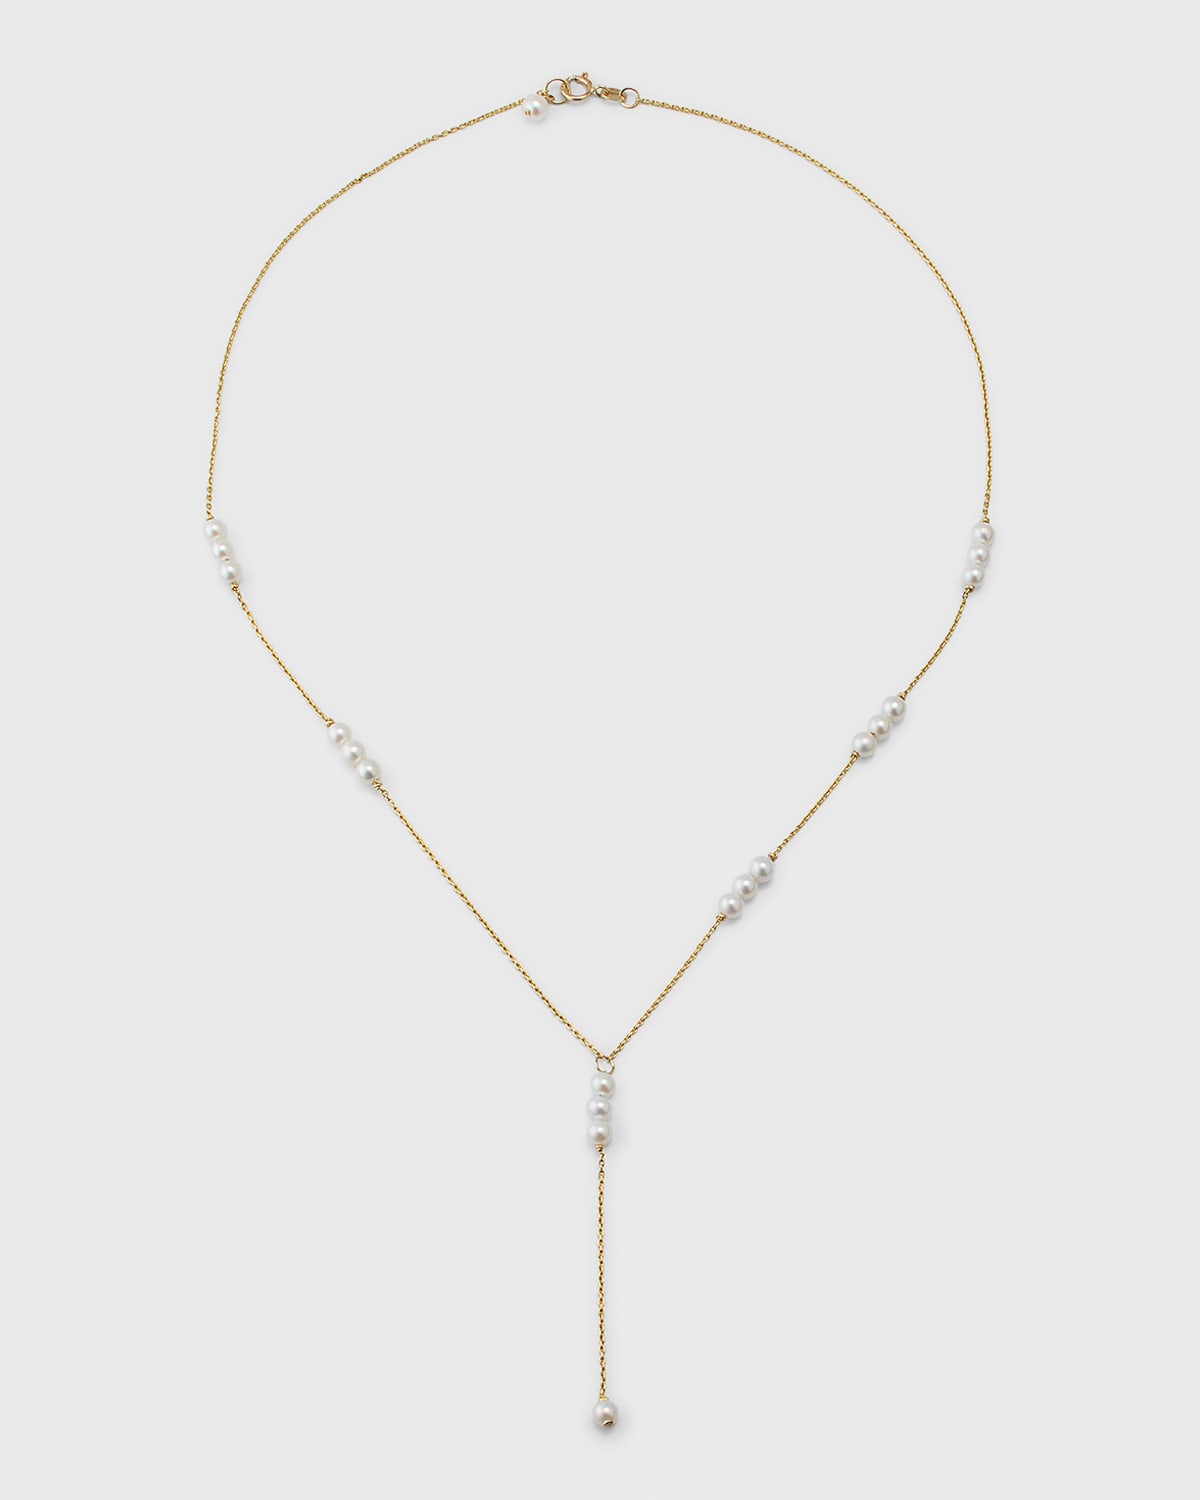 Poppy Finch 14k Gold Baby Pearl Lariat Necklace